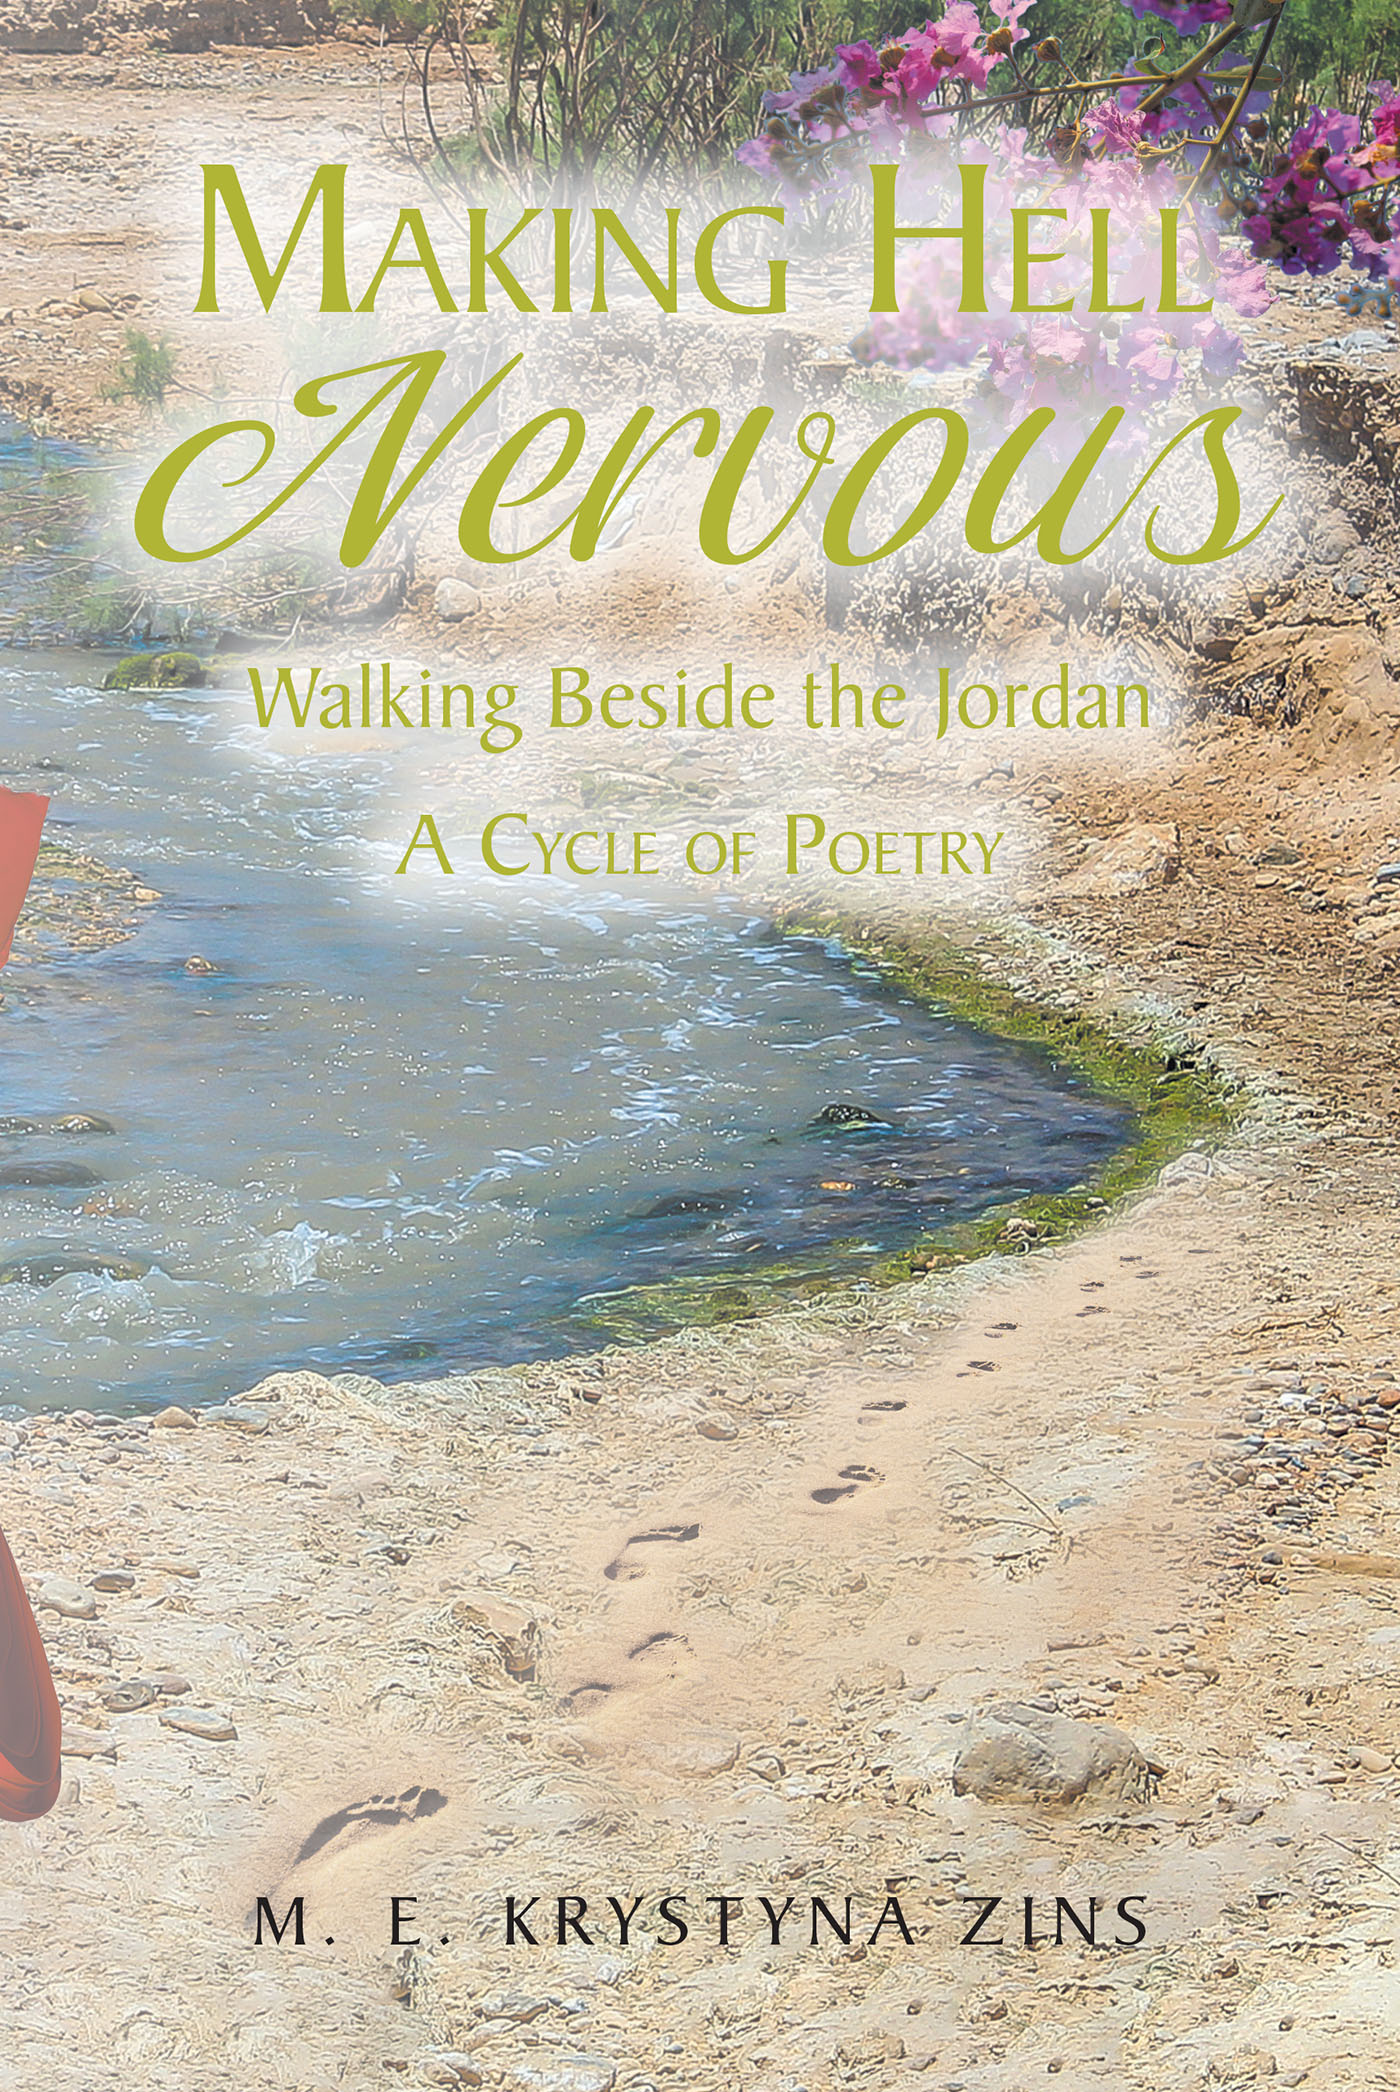 M. E. Krystyna Zins’s Newly Released “Making Hell Nervous: Walking Beside the Jordan: A Cycle of Poetry” is a Compelling Selection of Creative Verse